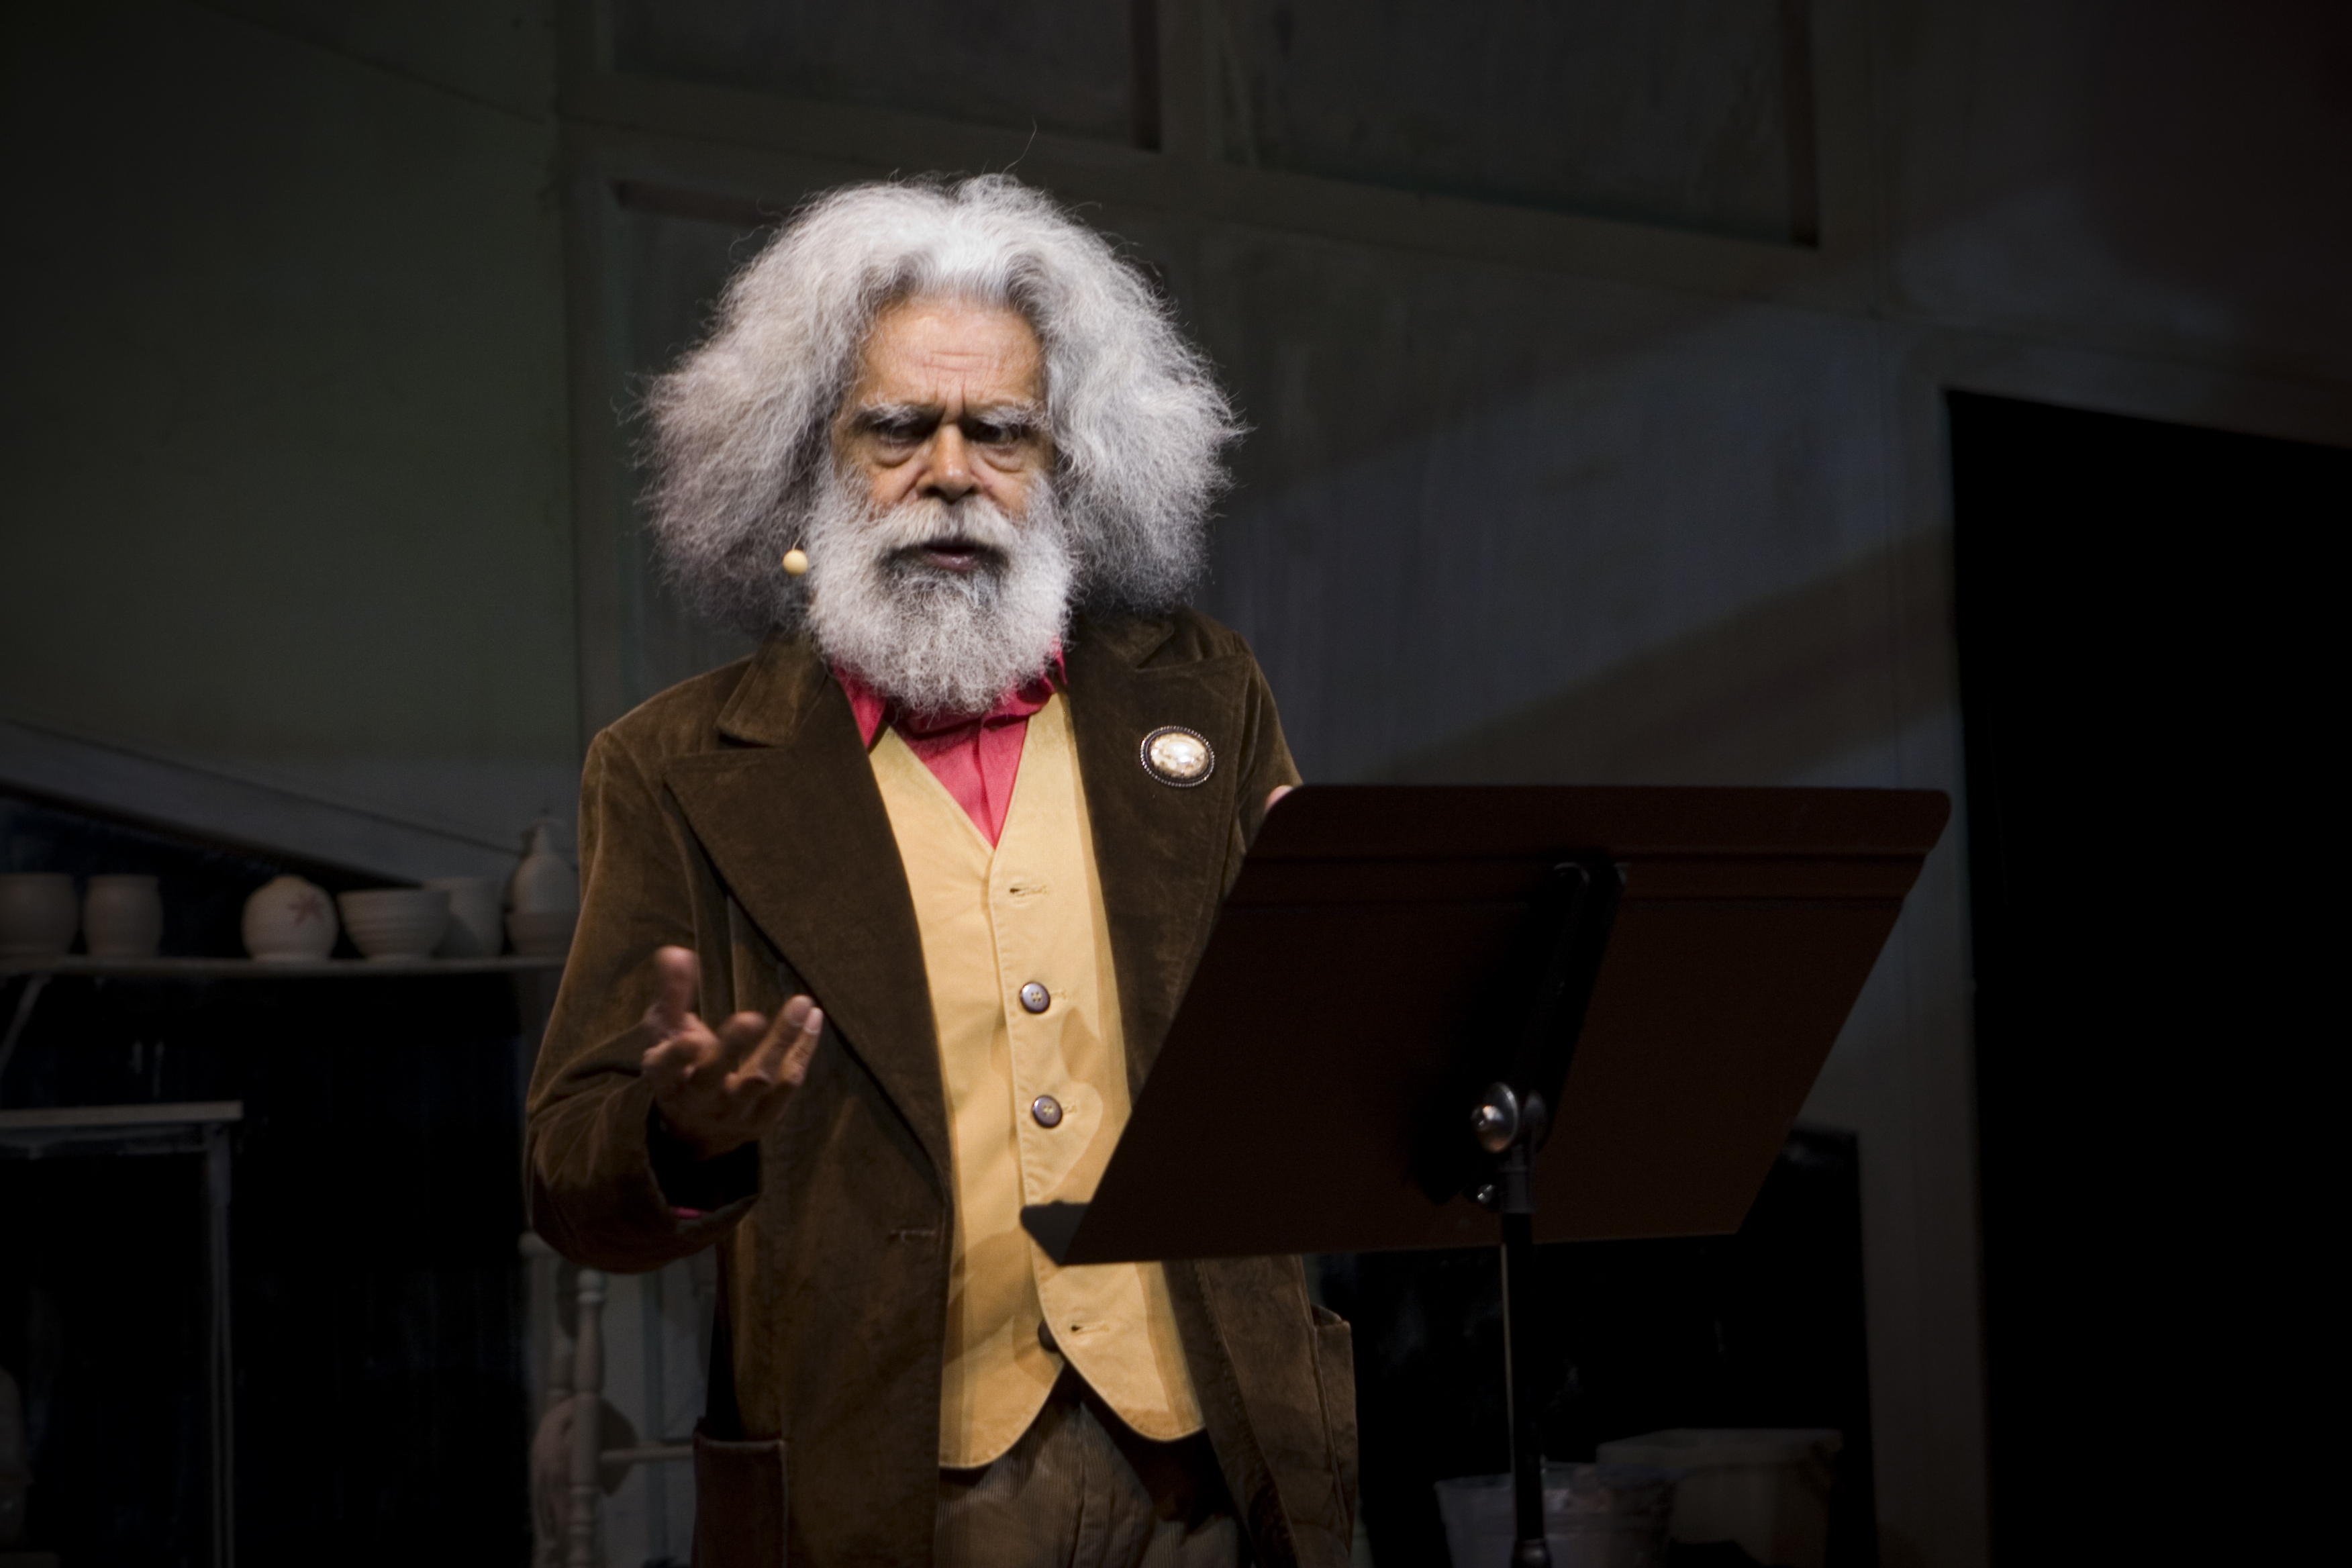 Still from a live performance of Jack Charles V. the Crown